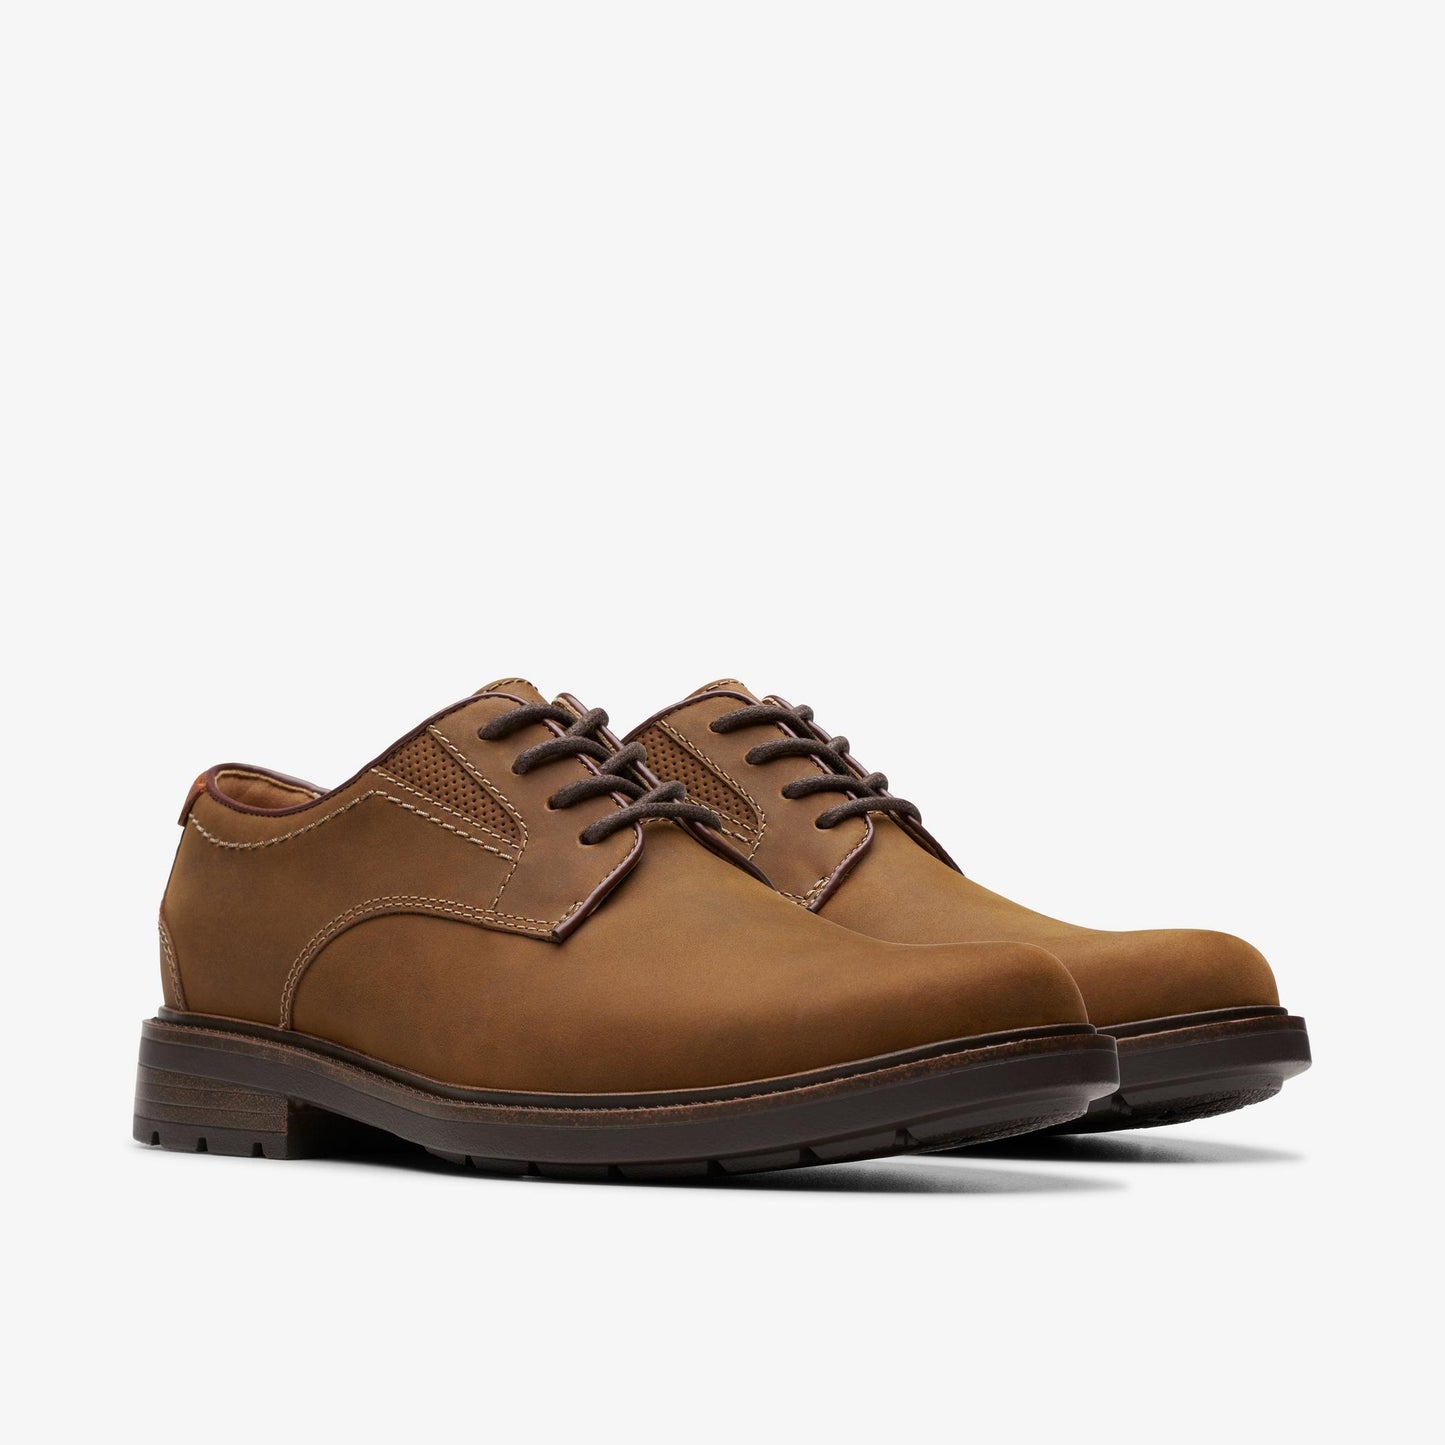 UN SHIRE LOW BEESWAX LEATHER by Clarks